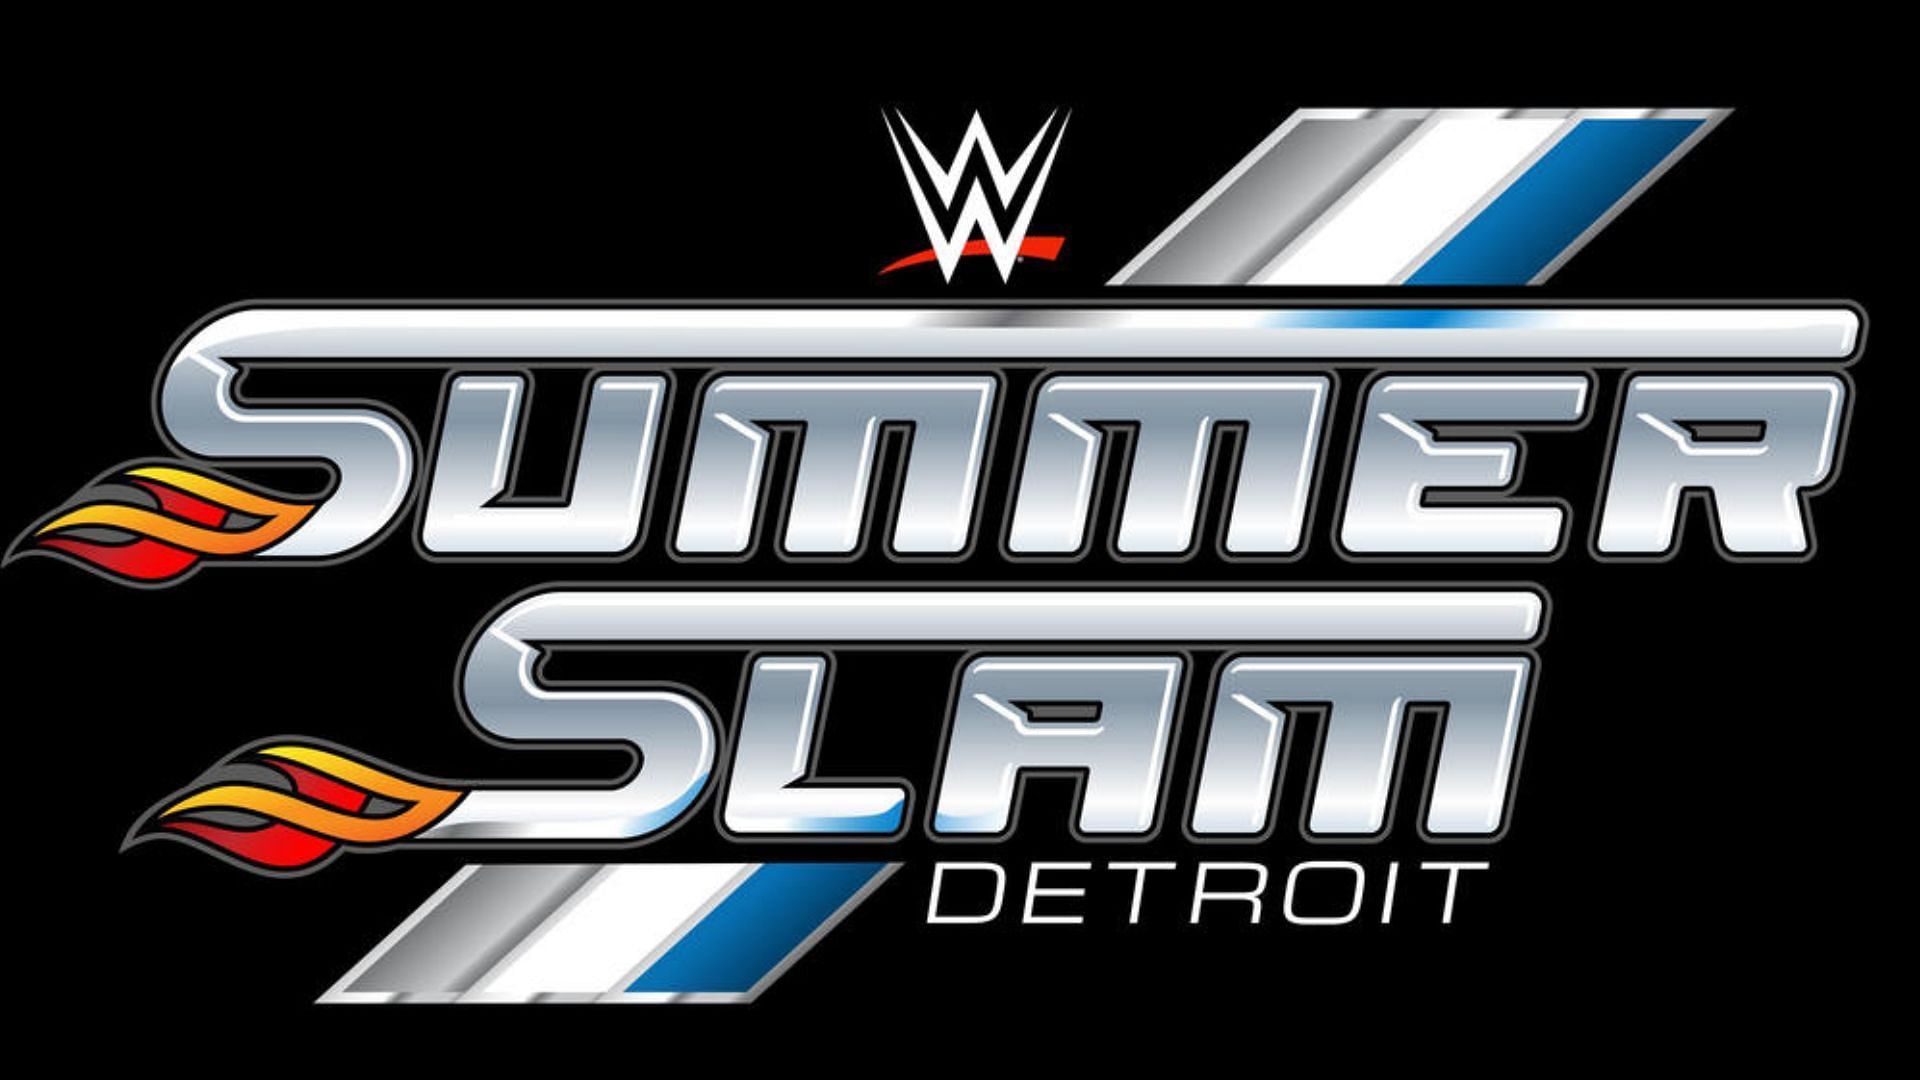 SummerSlam aired live last night in Detroit.